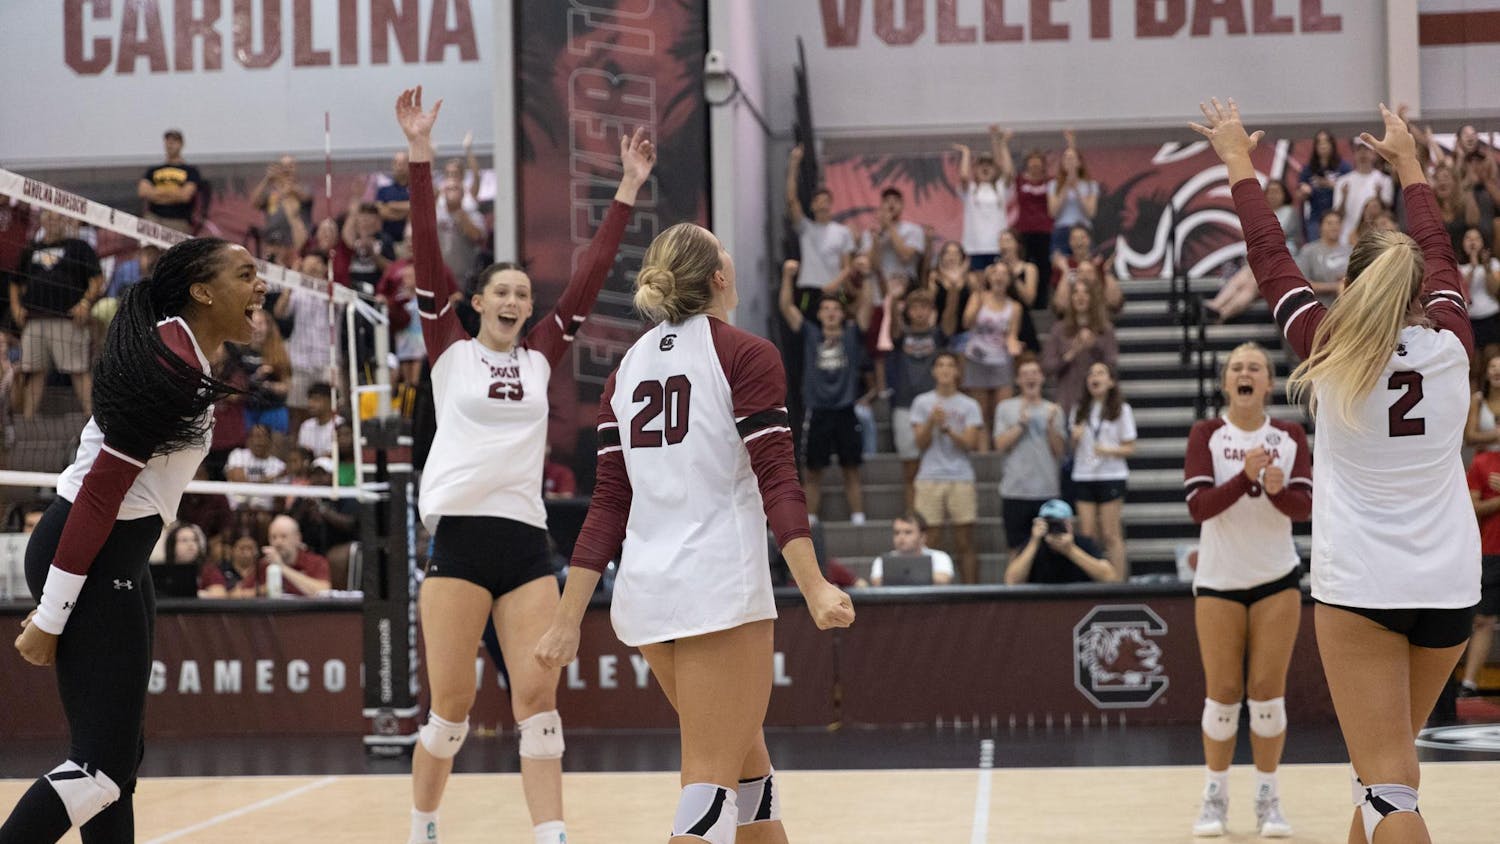 The USC women's volleyball team celebrates earning a point during its match against Towson University on Aug. 26. The Gamecocks defeated the Tigers 3-1 after losing 3-0 earlier in the weekend.